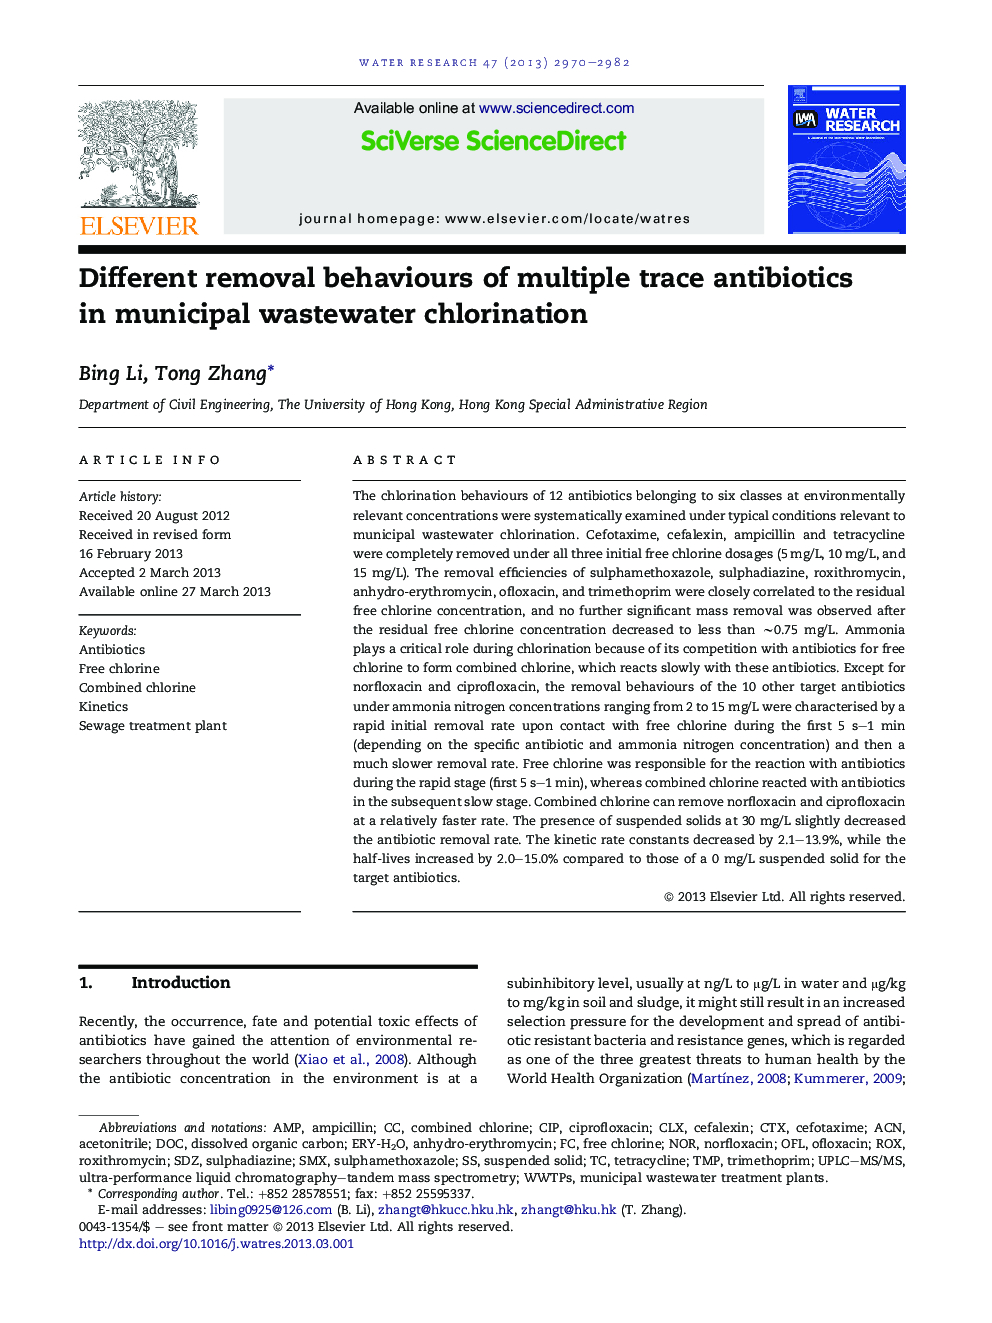 Different removal behaviours of multiple trace antibiotics in municipal wastewater chlorination